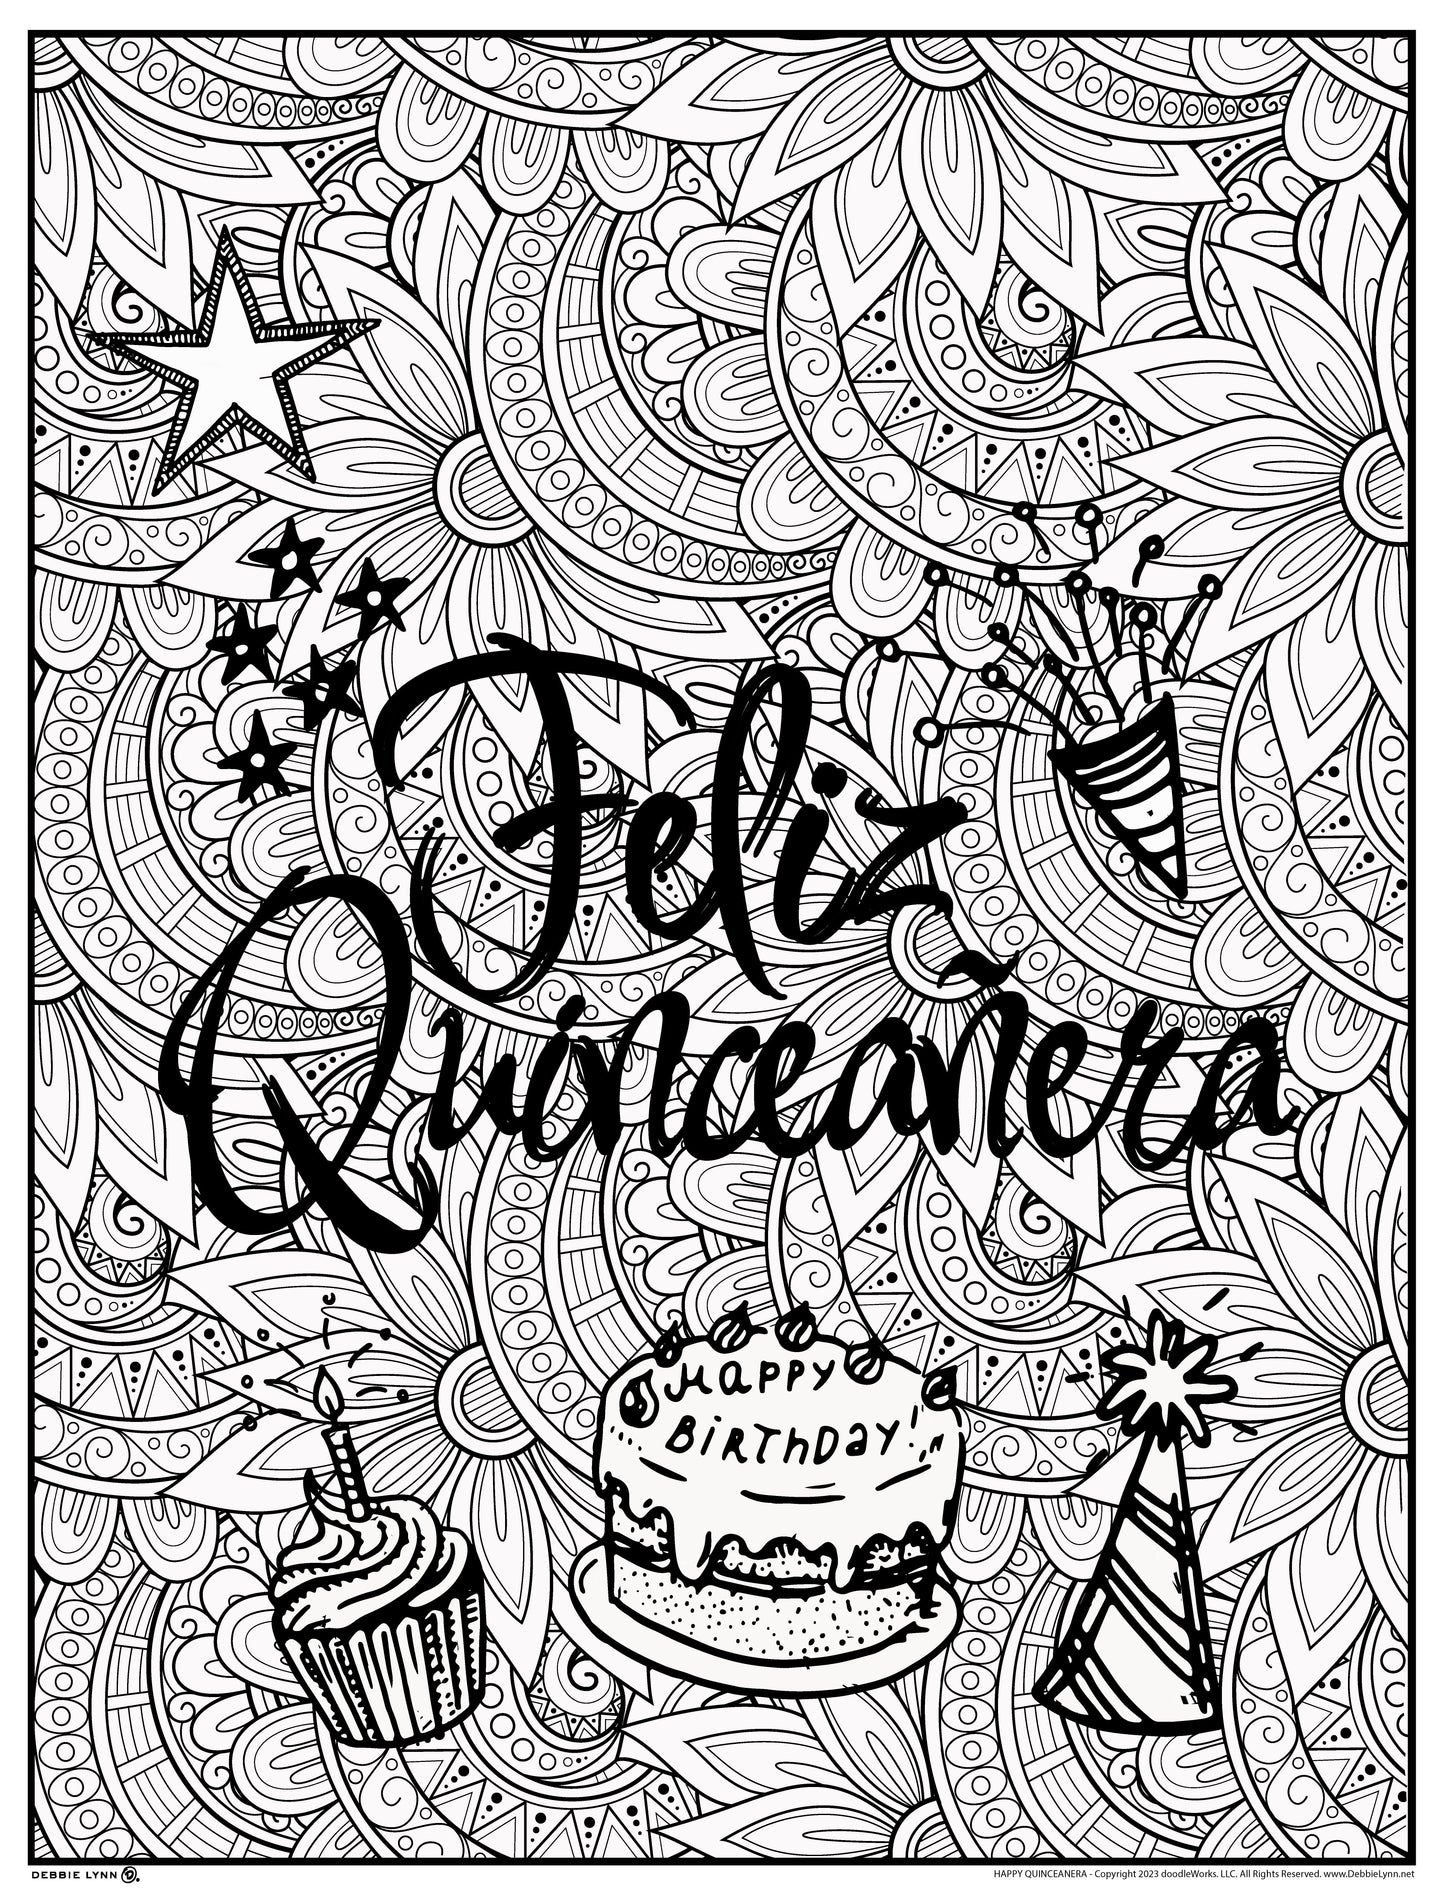 Happy Quinceanera Personalized Giant Coloring Poster 46"x60"